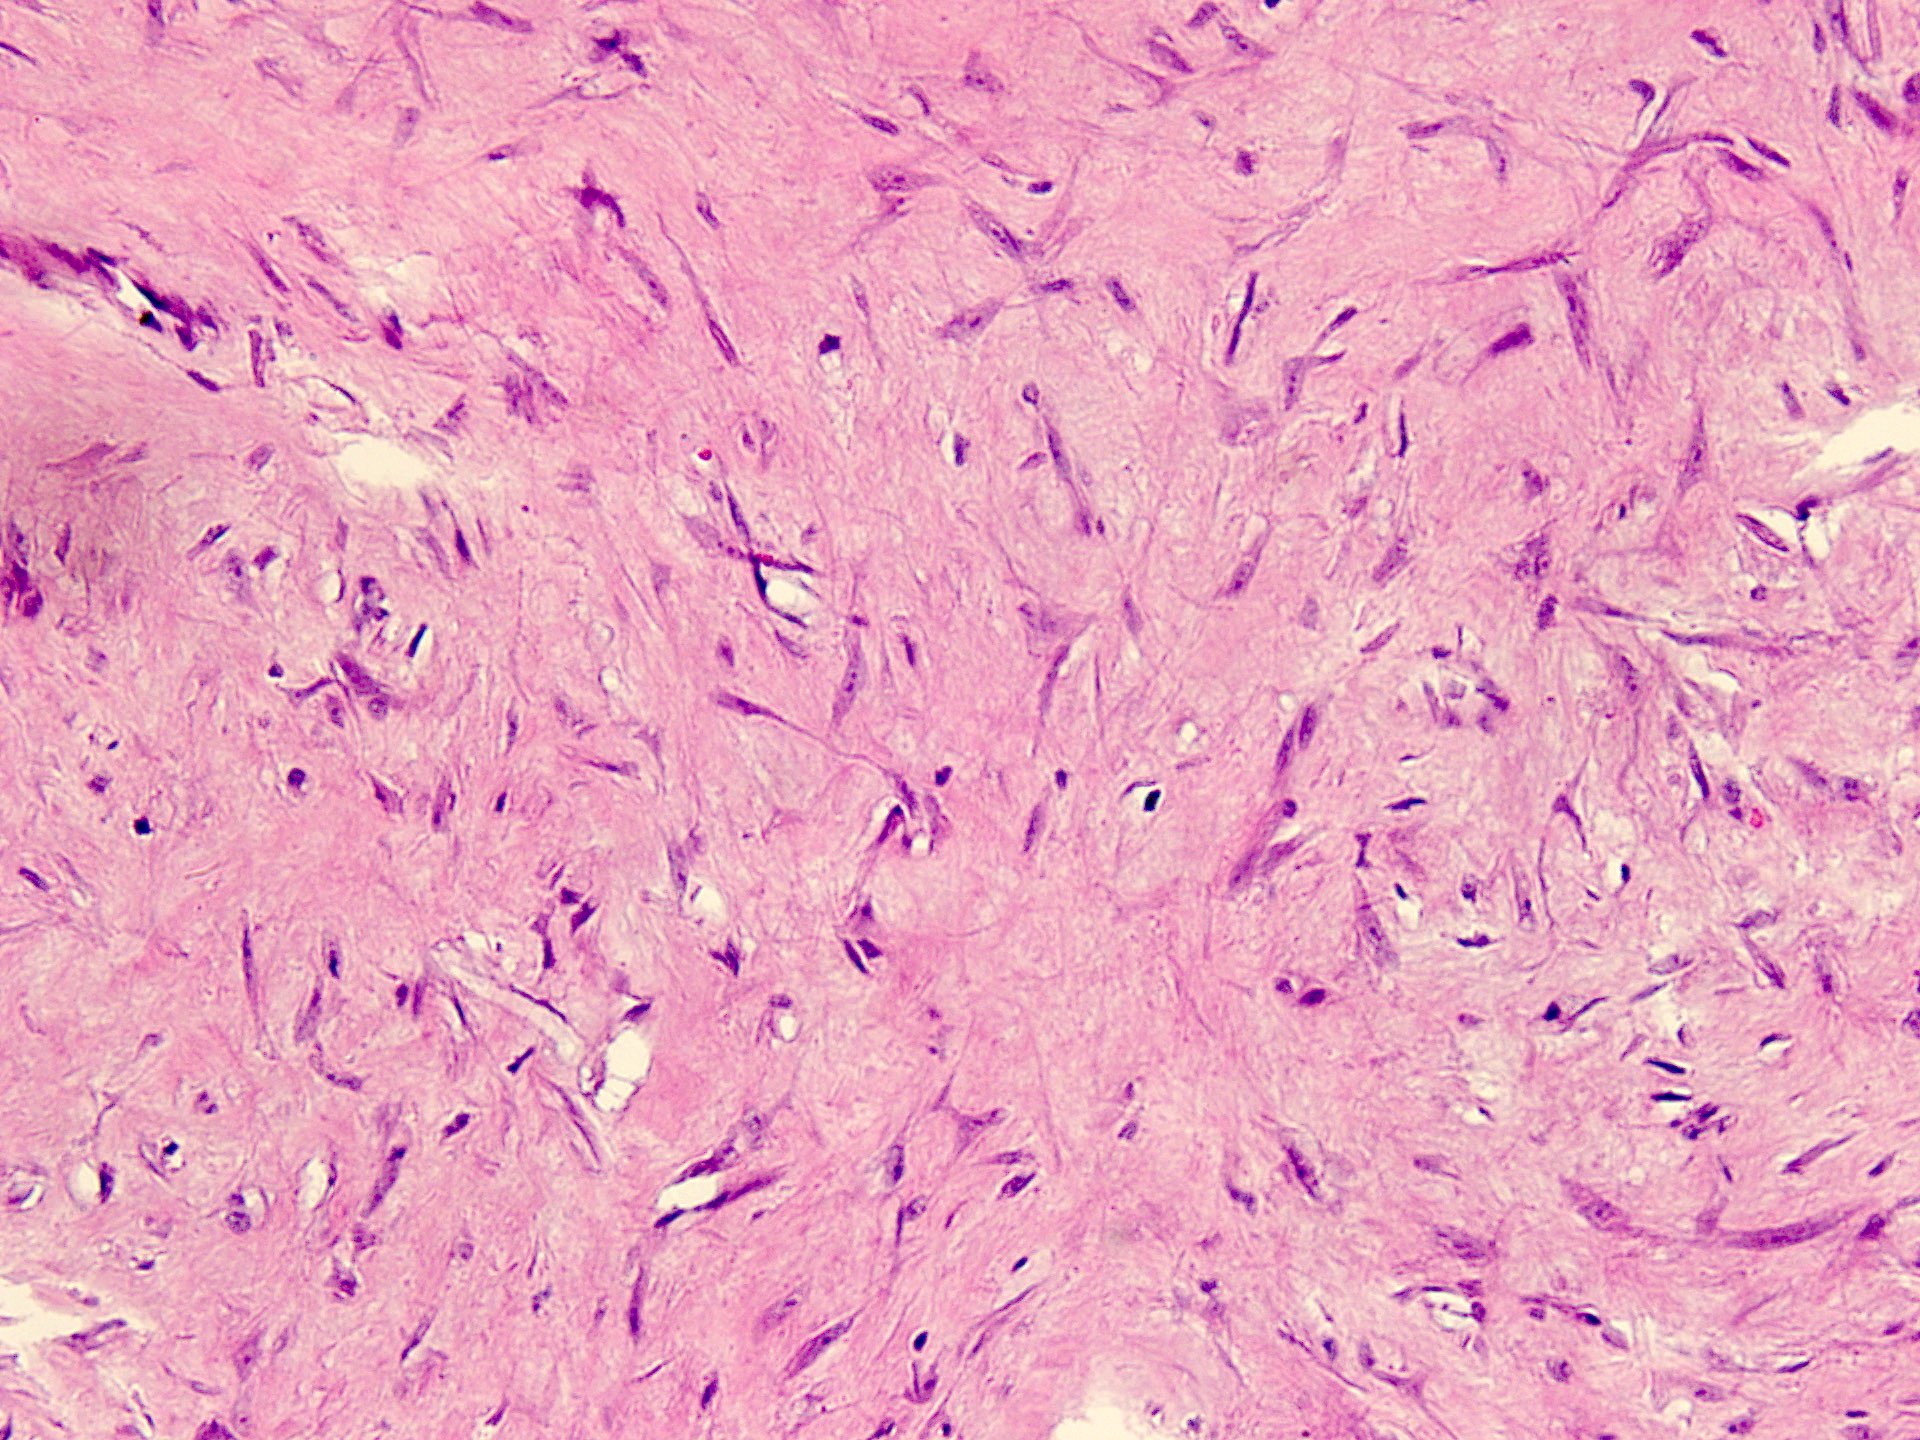 Spindle cell proliferation